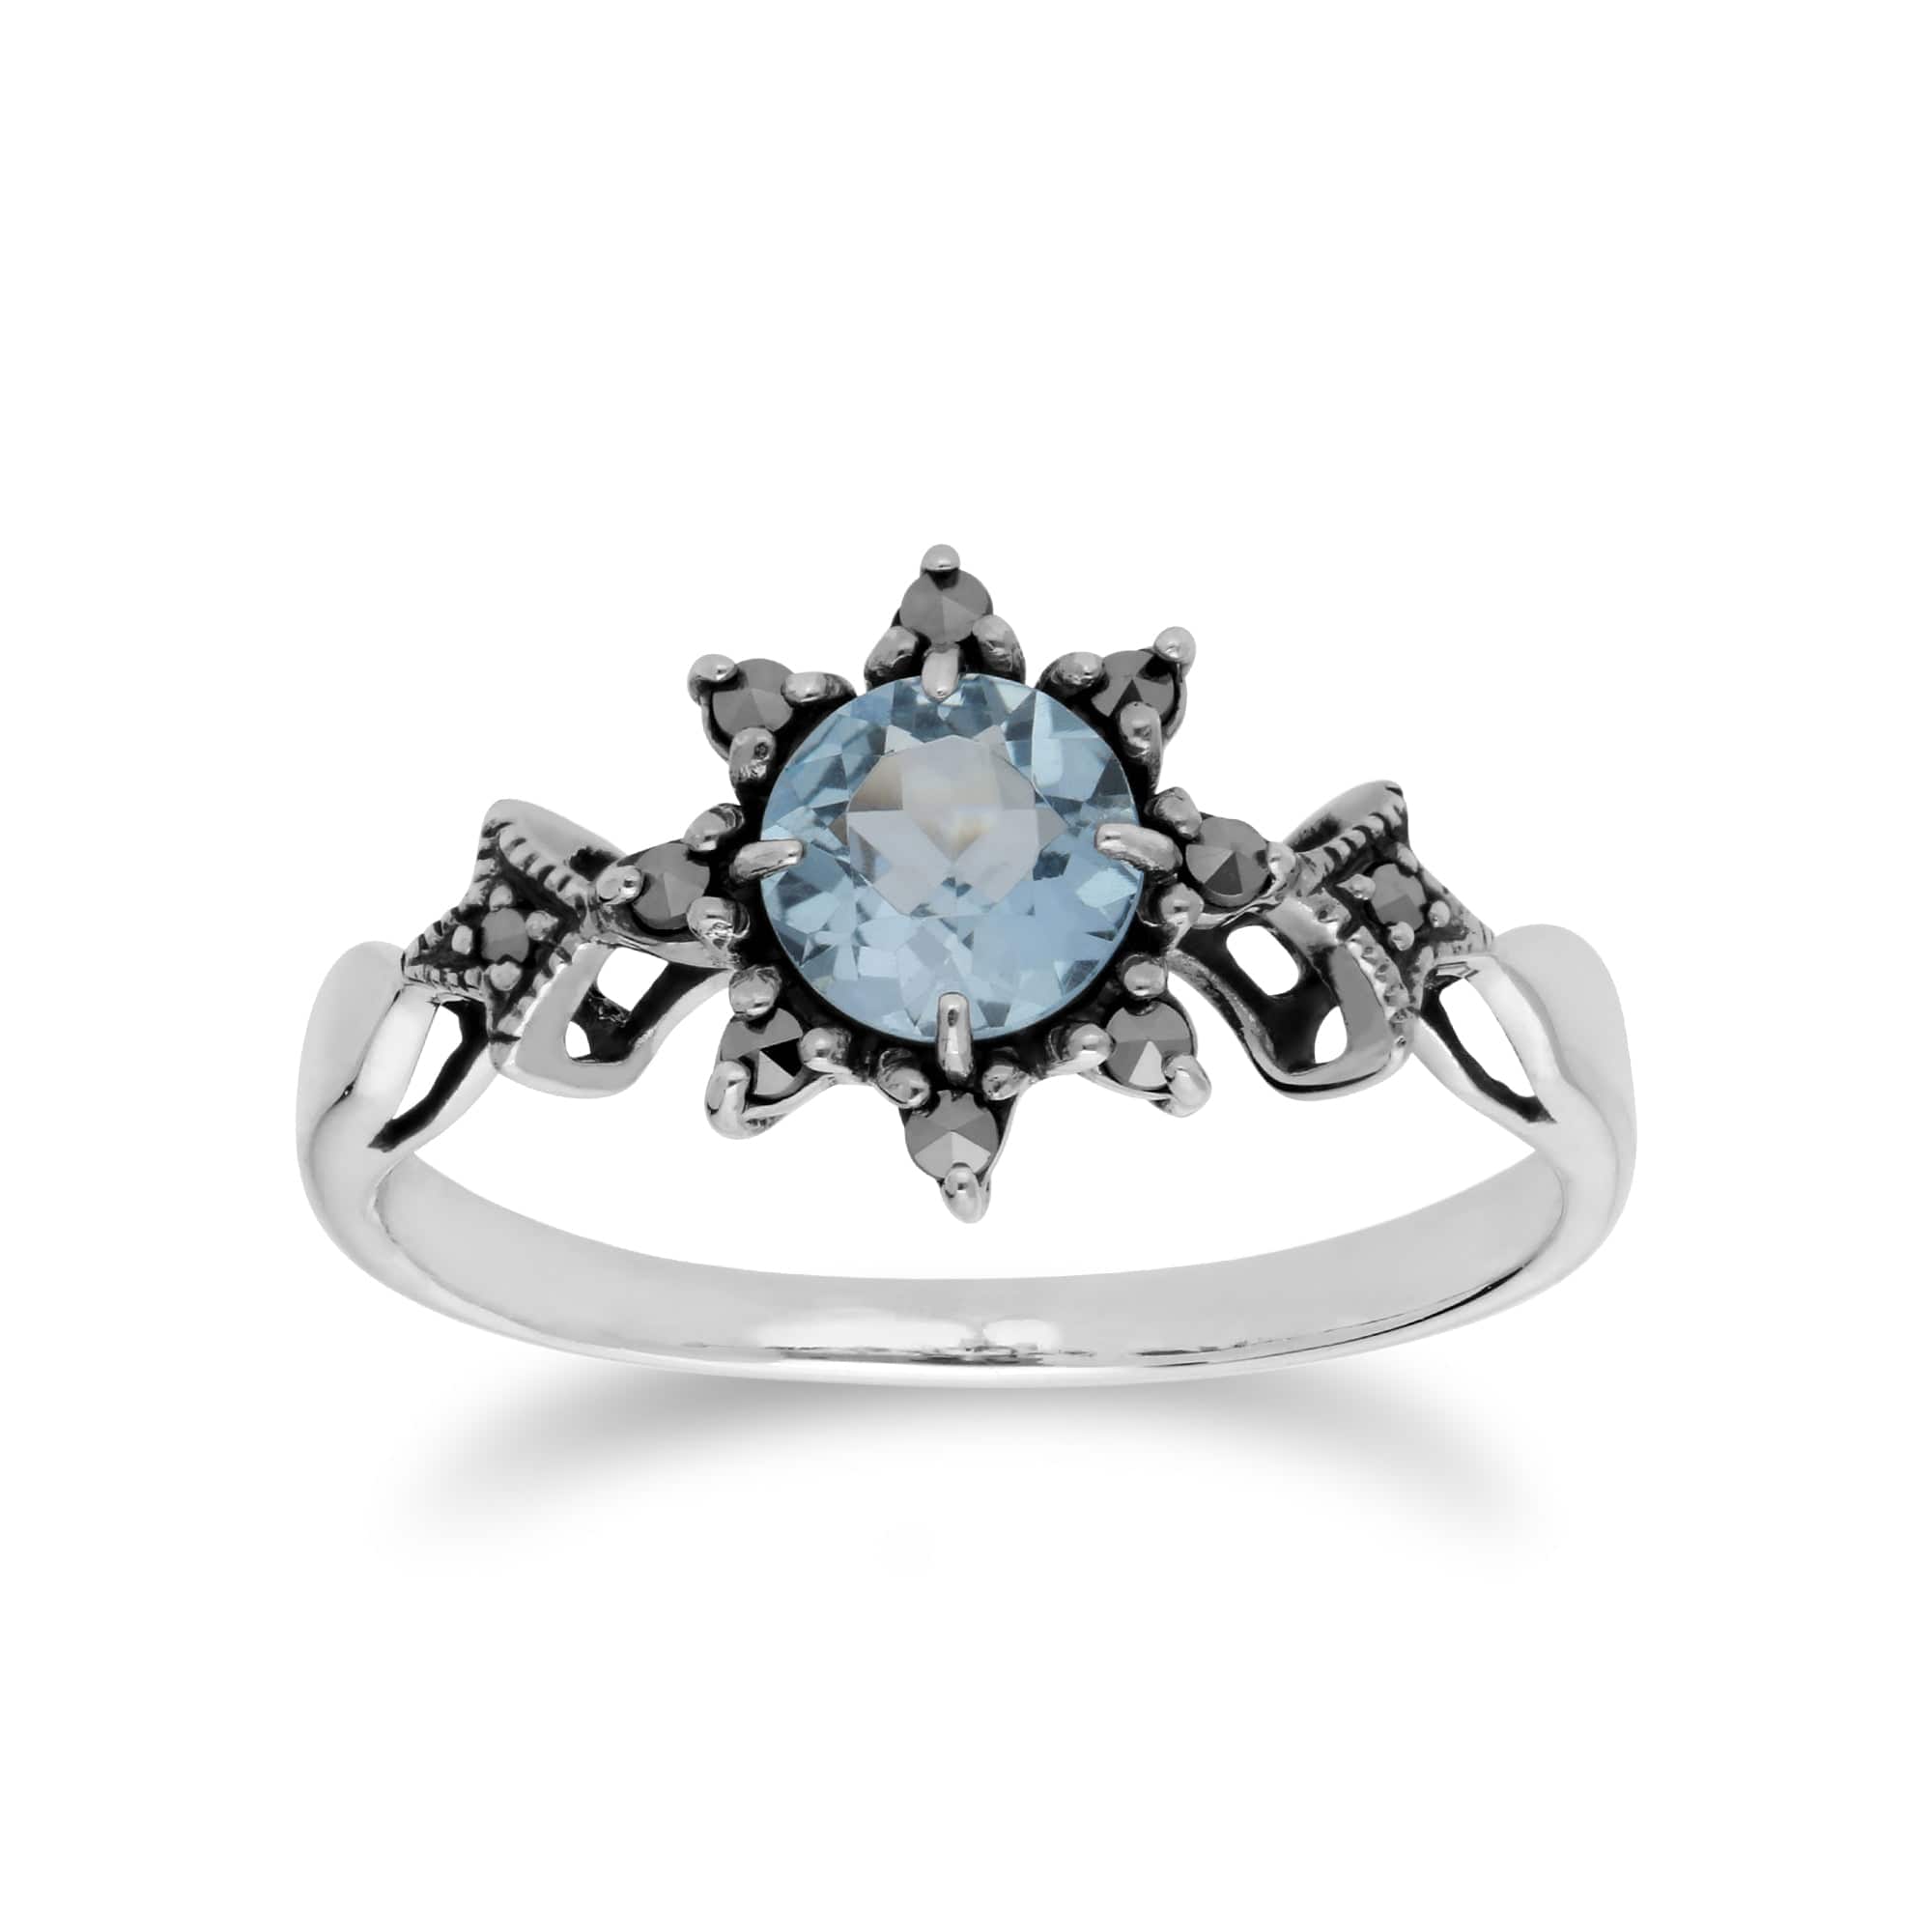 Art Deco Style Round Blue Topaz & Marcasite Floral Ring in 925 Sterling Silver - Gemondo